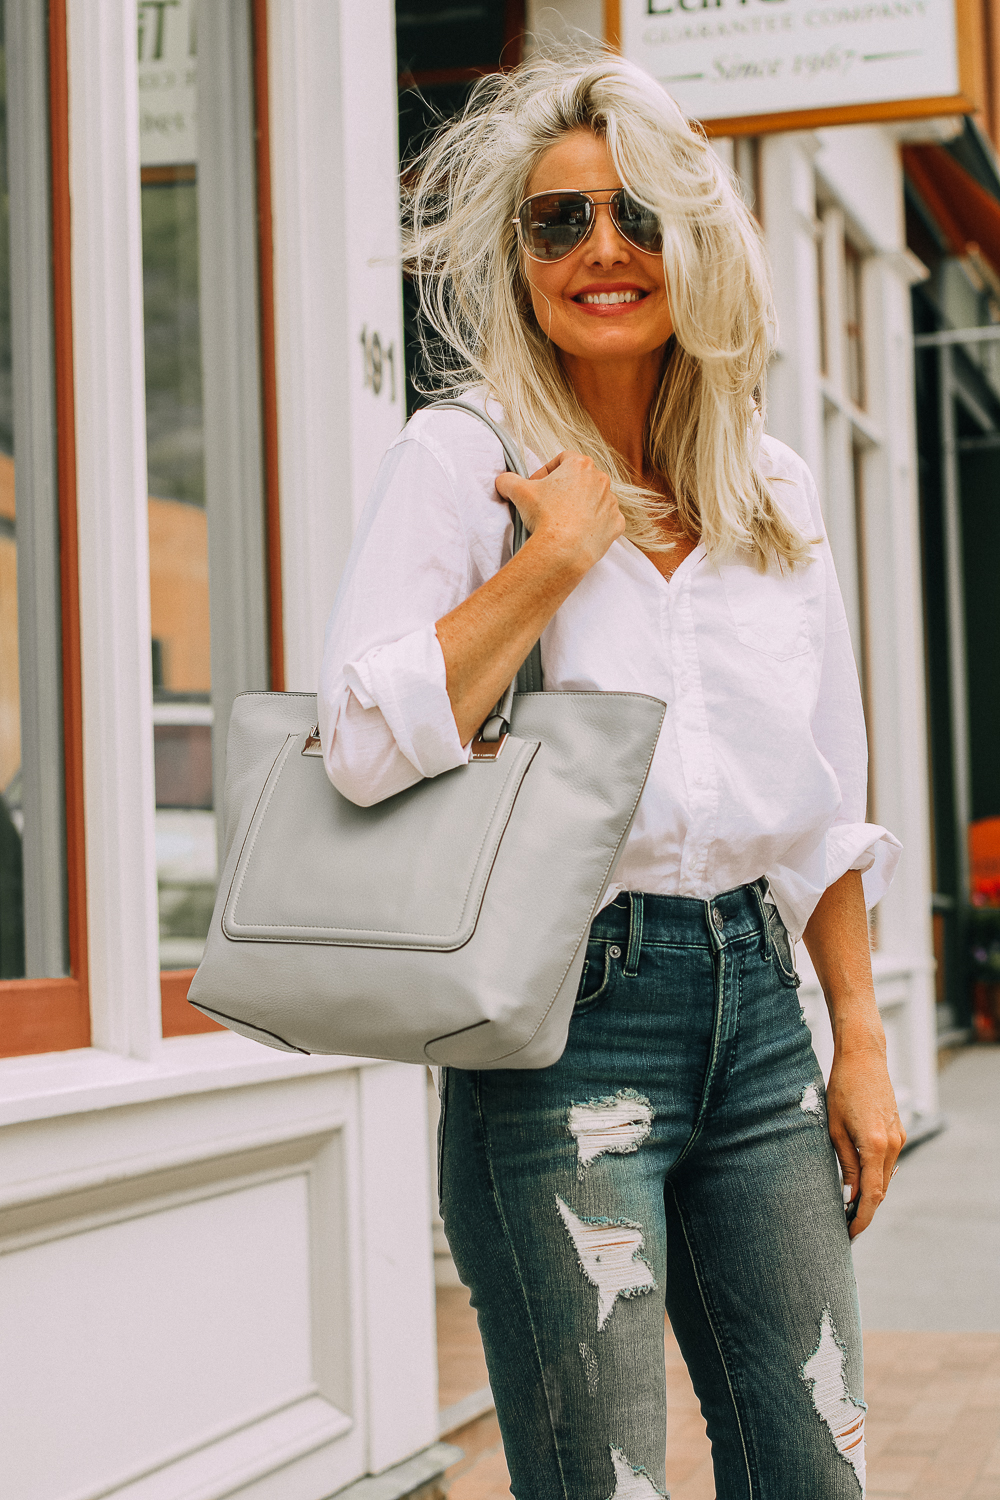 Vince Camuto gray tote bag paired with white button down frank and eileen shirt